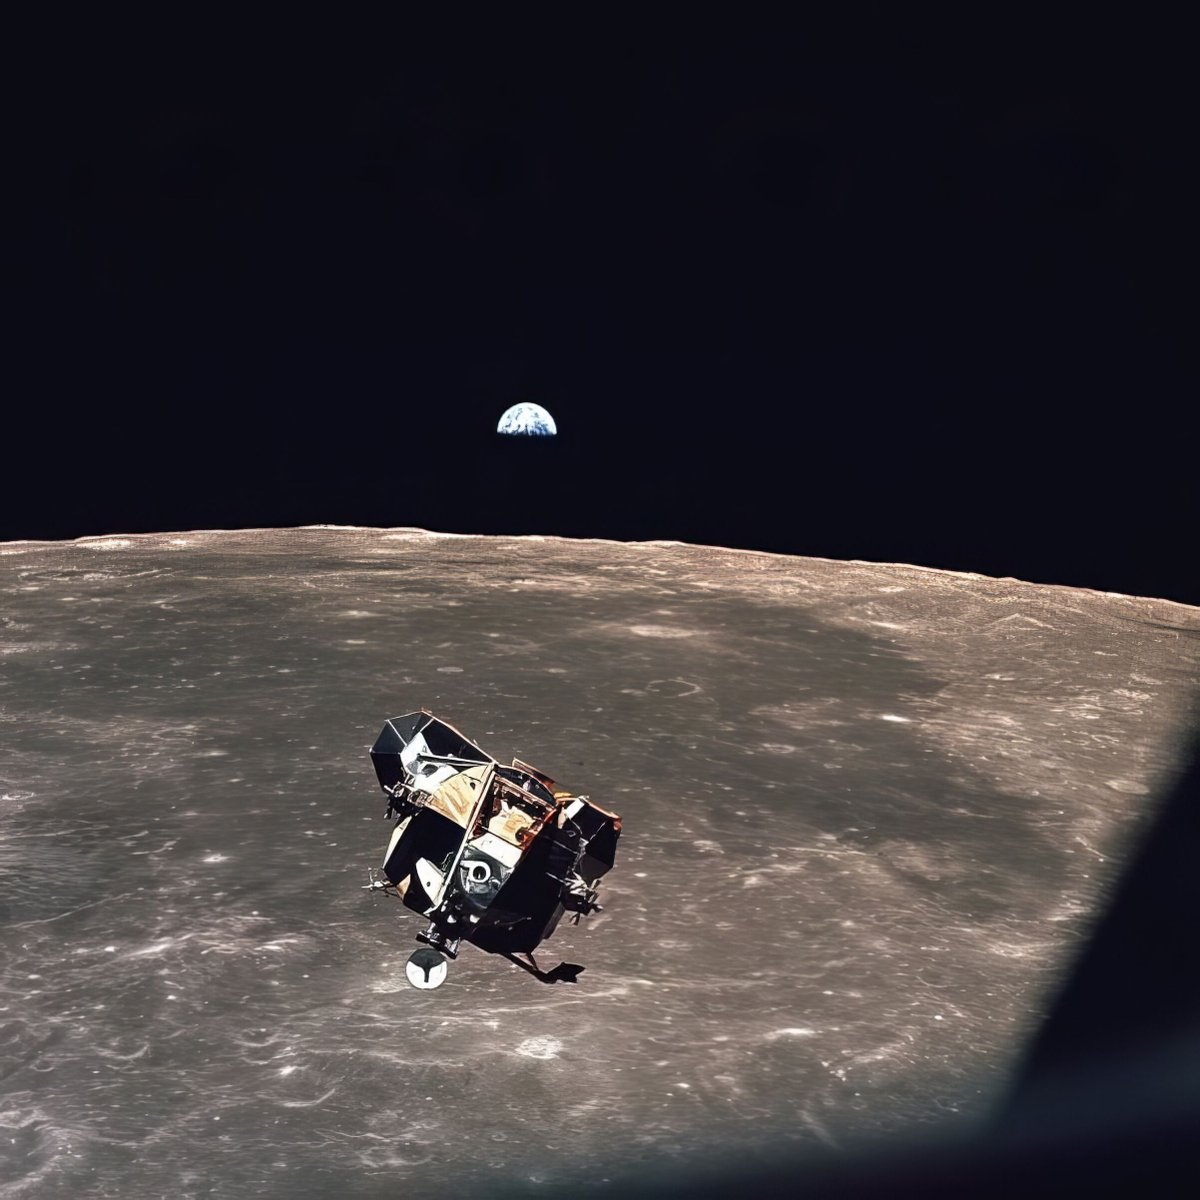 Astronaut Michael Collins took this historic photo in 1969, making him the only human, alive or dead, not in the frame. 🌍🚀